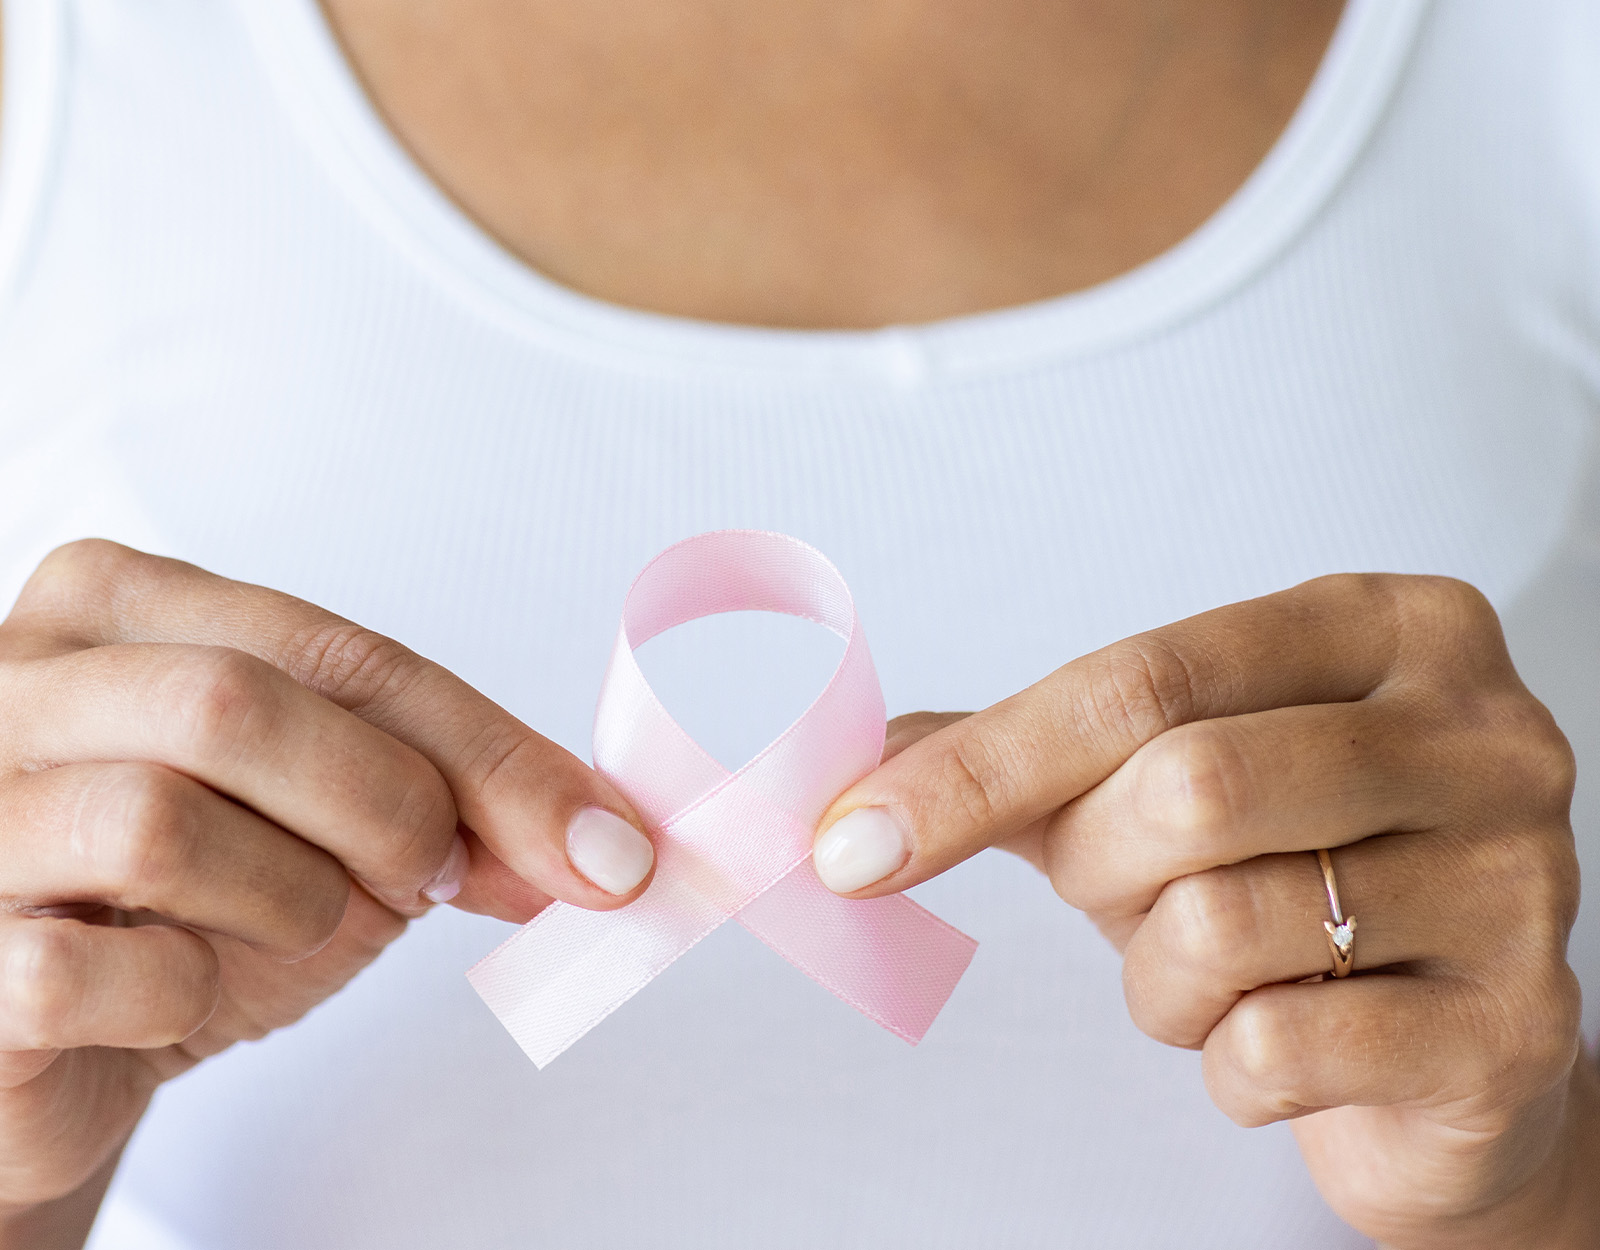 Why We Celebrate Breast Cancer Awareness Month in October